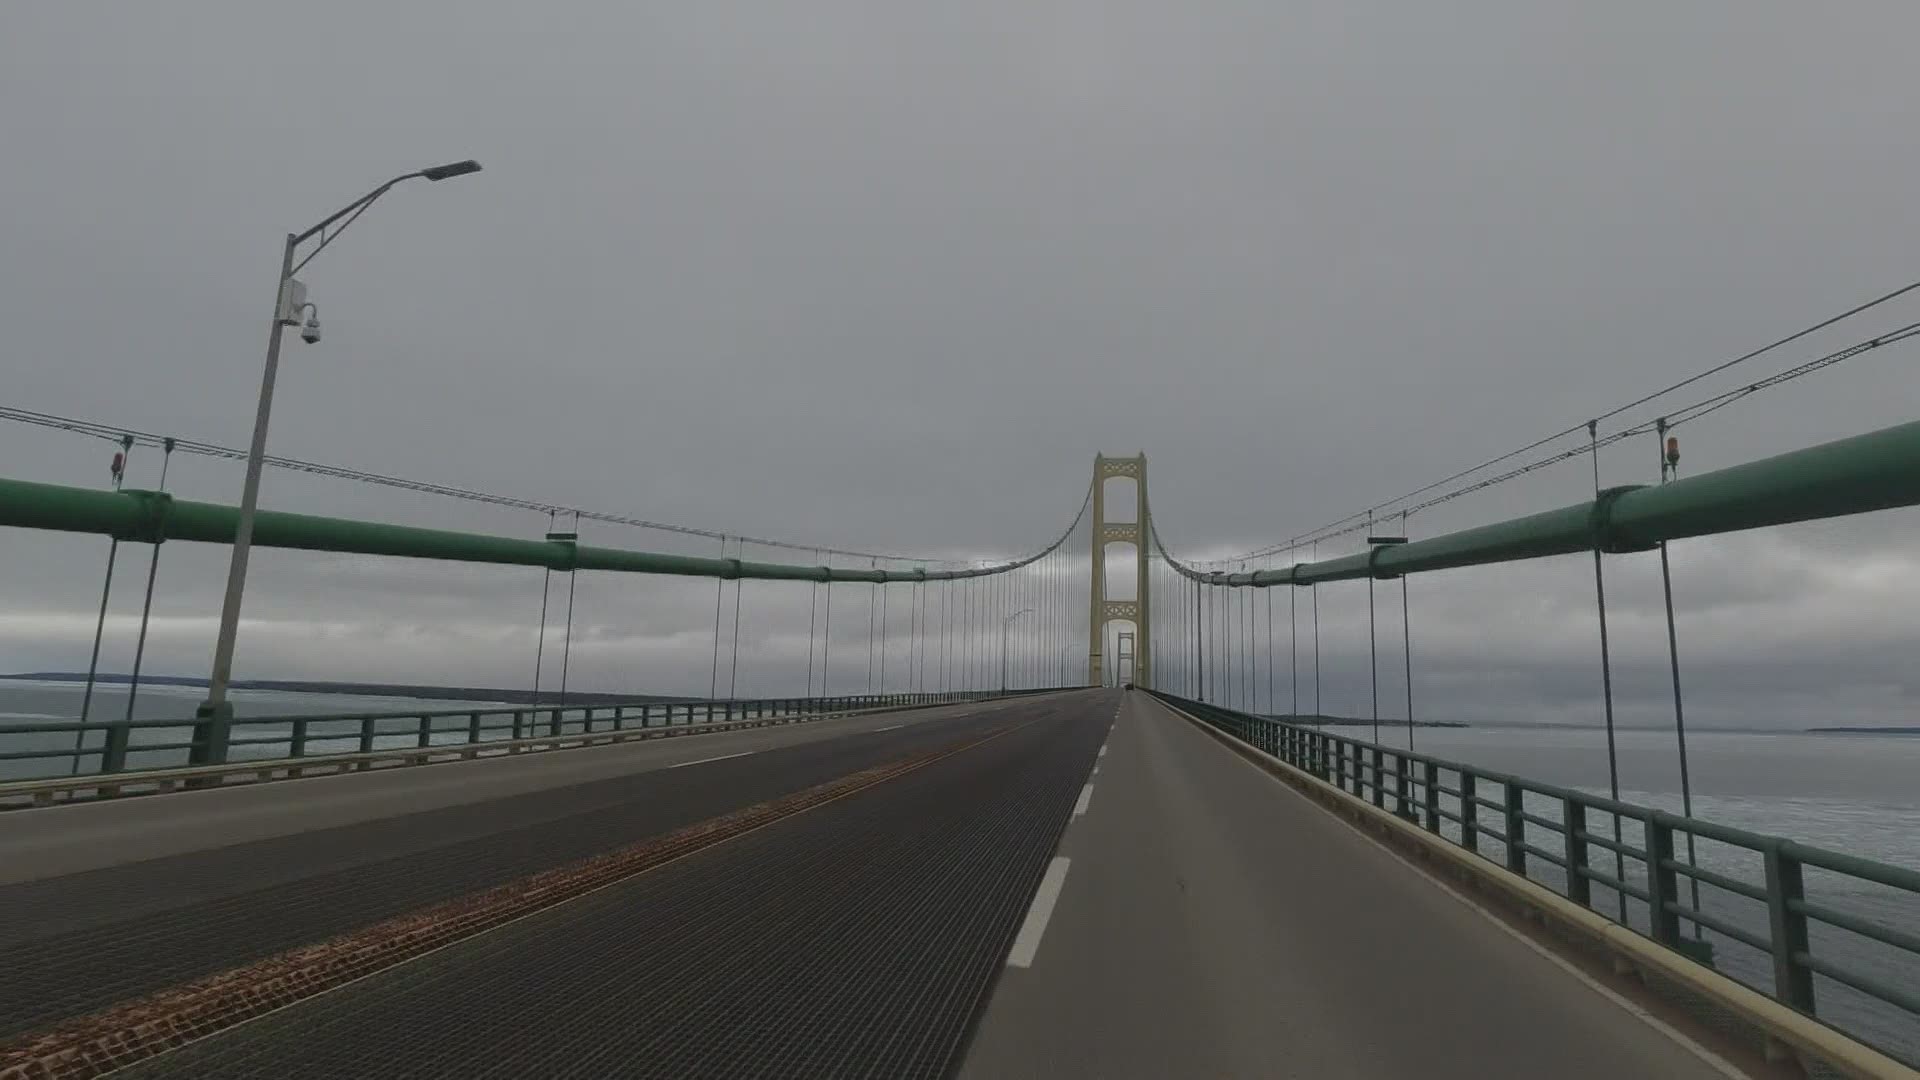 Since 2016, every spring and fall, used pieces of the Mackinac Bridge are put up for auction. 4,000-lb grates have gone for over $5,000!